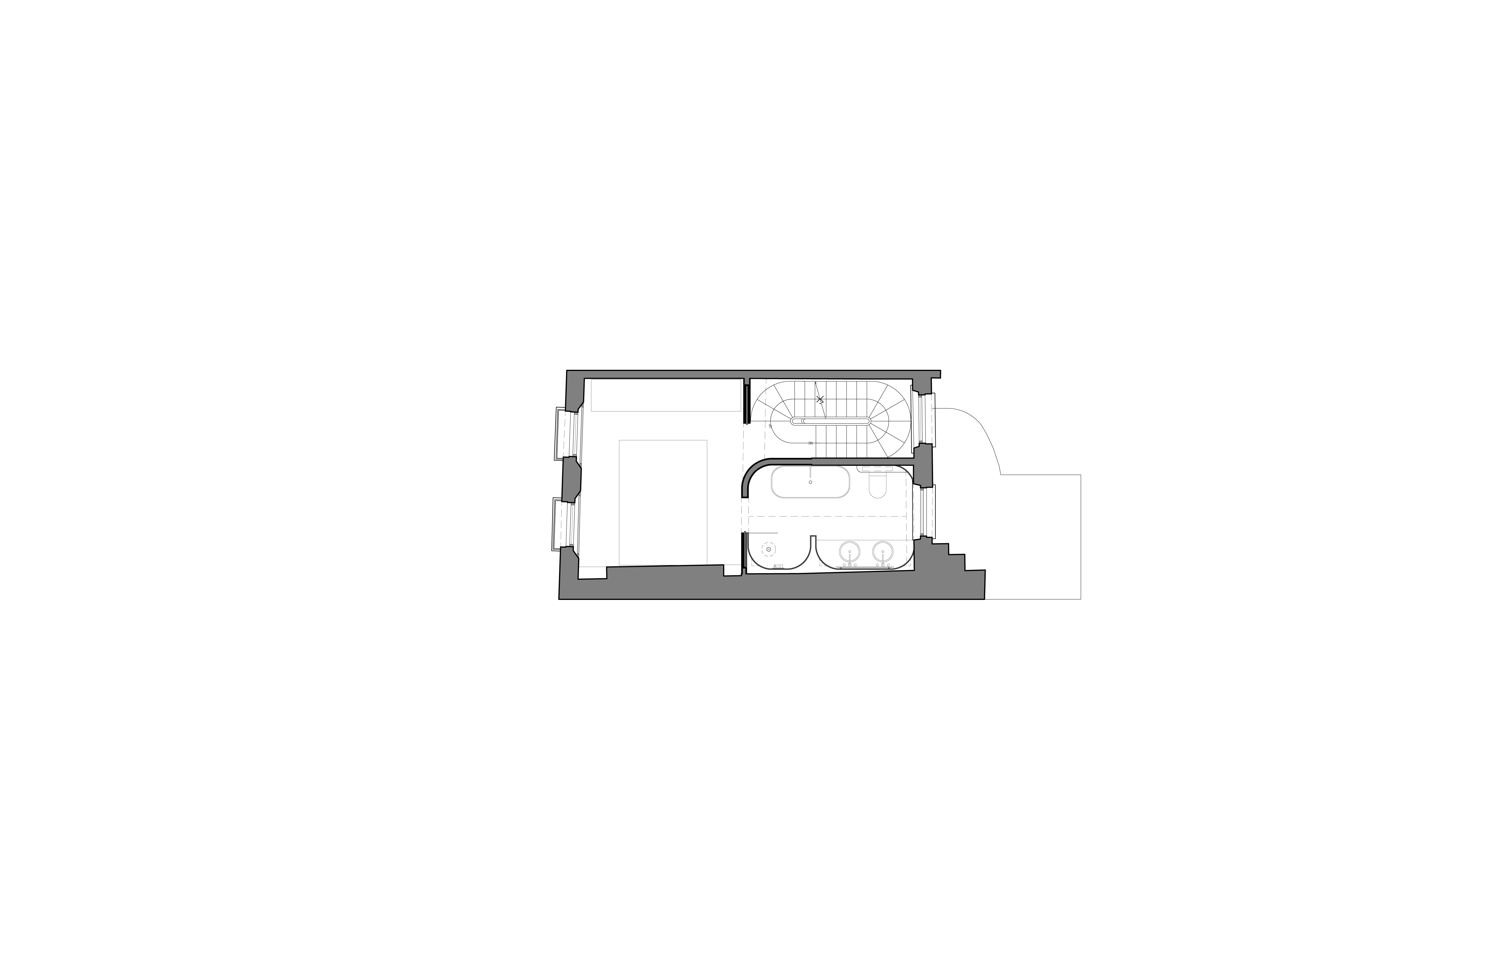 Third floor plan, courtesy of Architensions